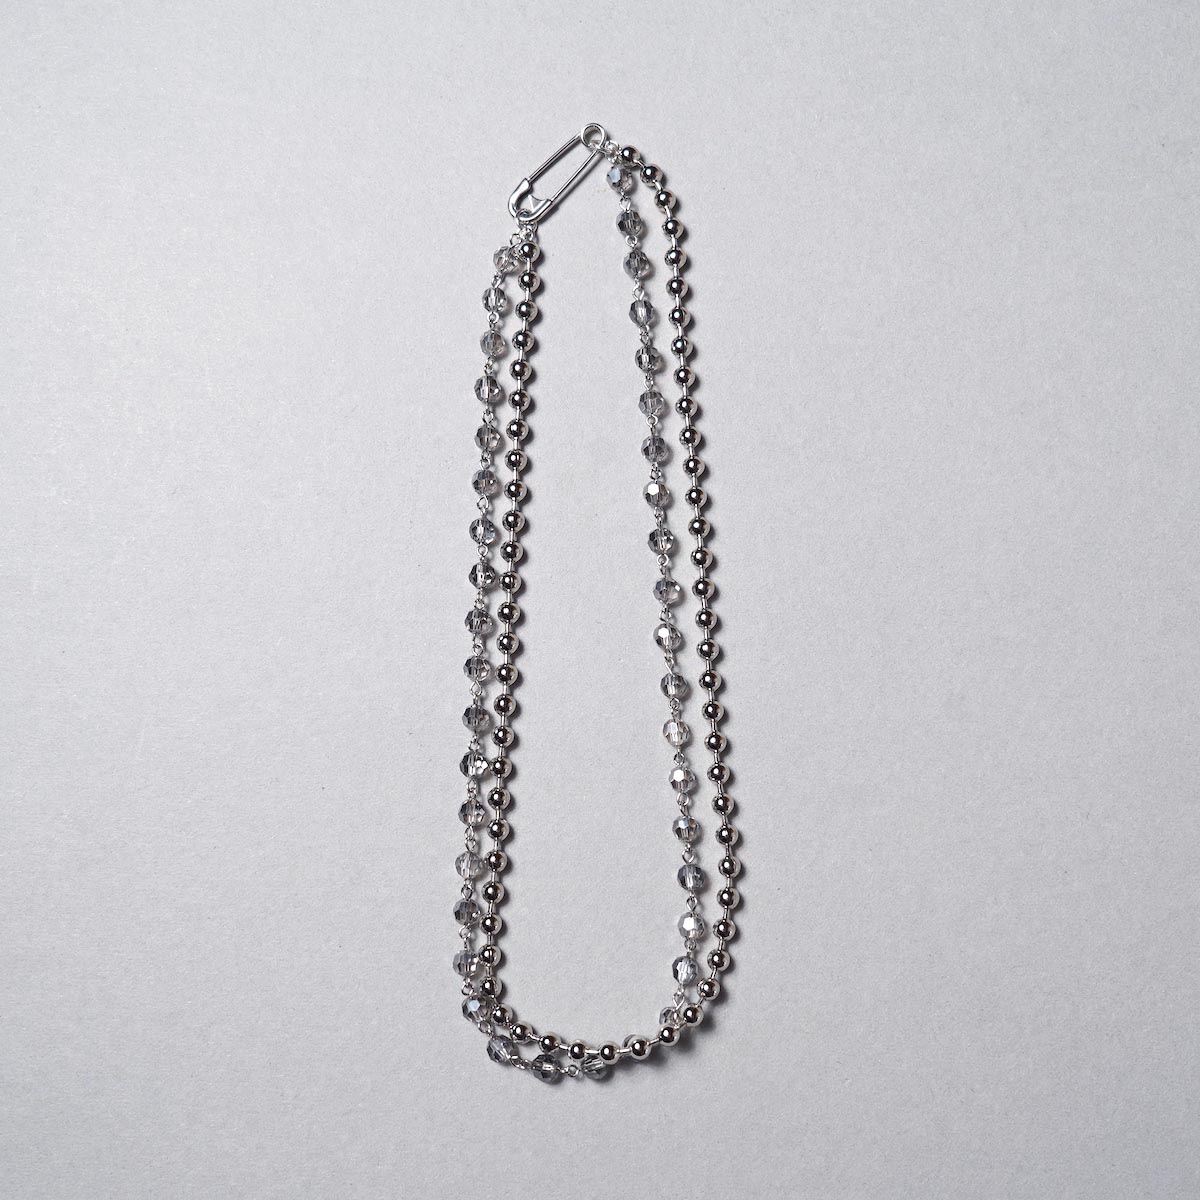 The Soloist / sa.0025AW22 single glass beads with ball chain neck lace. (Black)